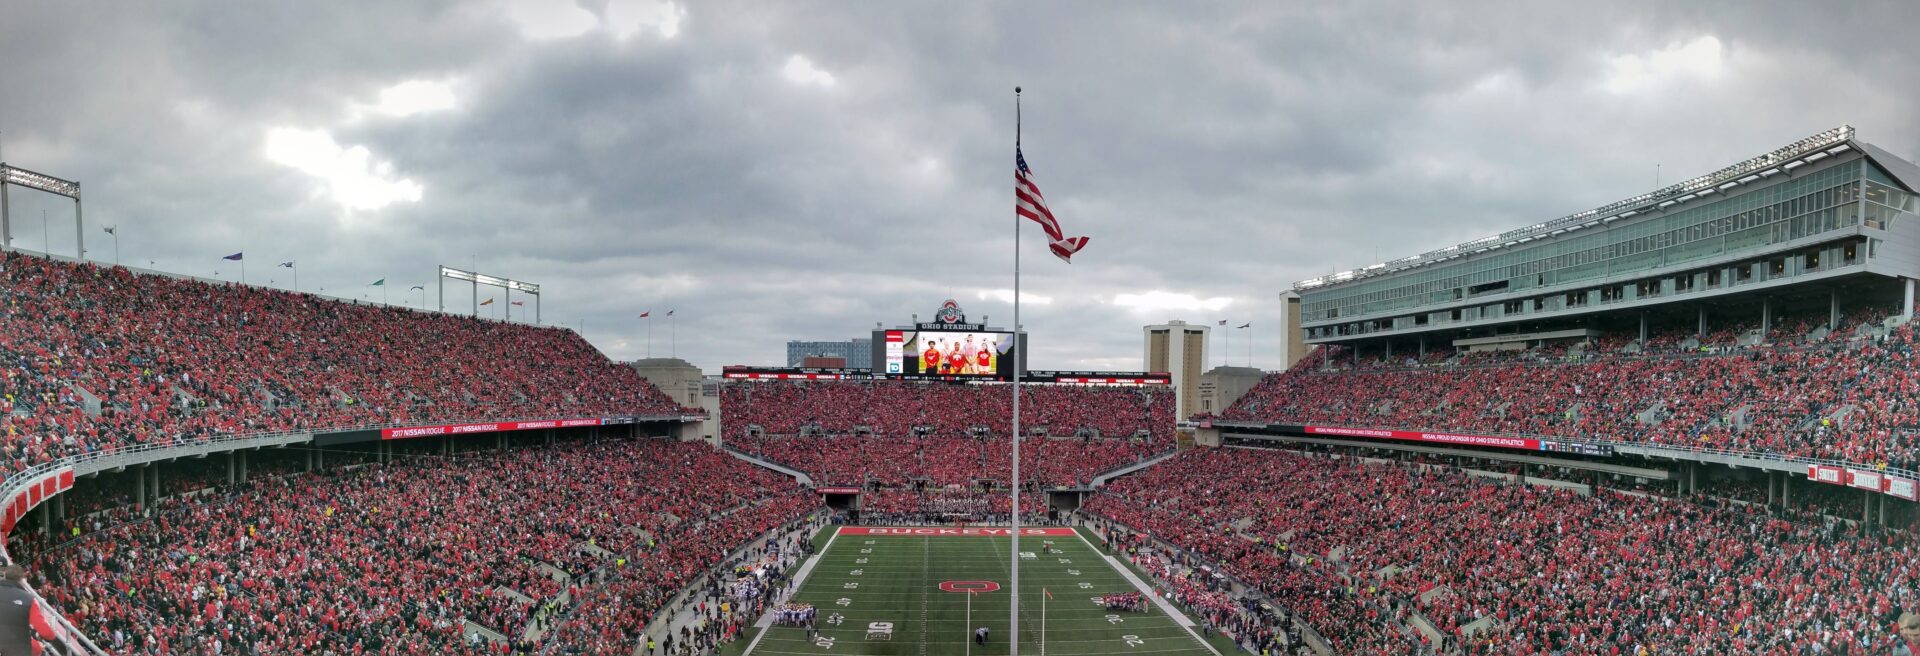 a football stadium with a flag pole and people in the background